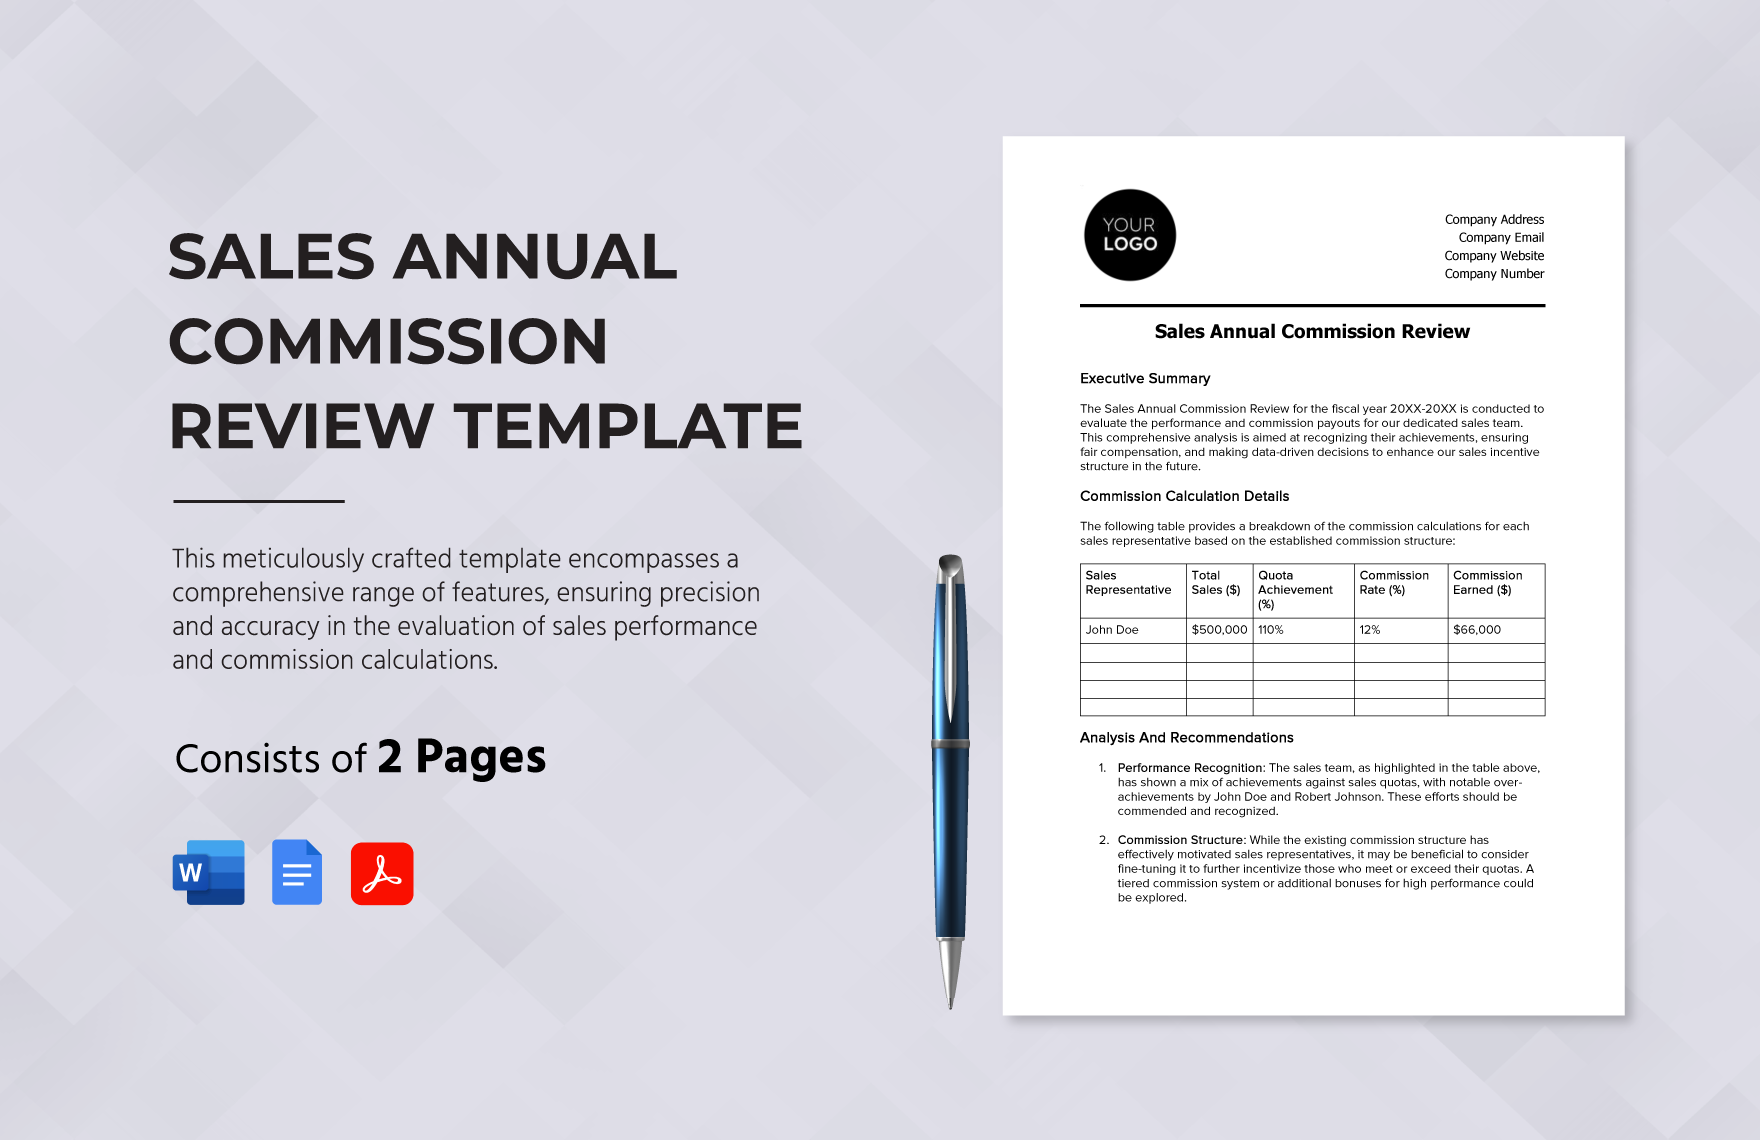 Sales Annual Commission Review Template in Word, Google Docs, PDF